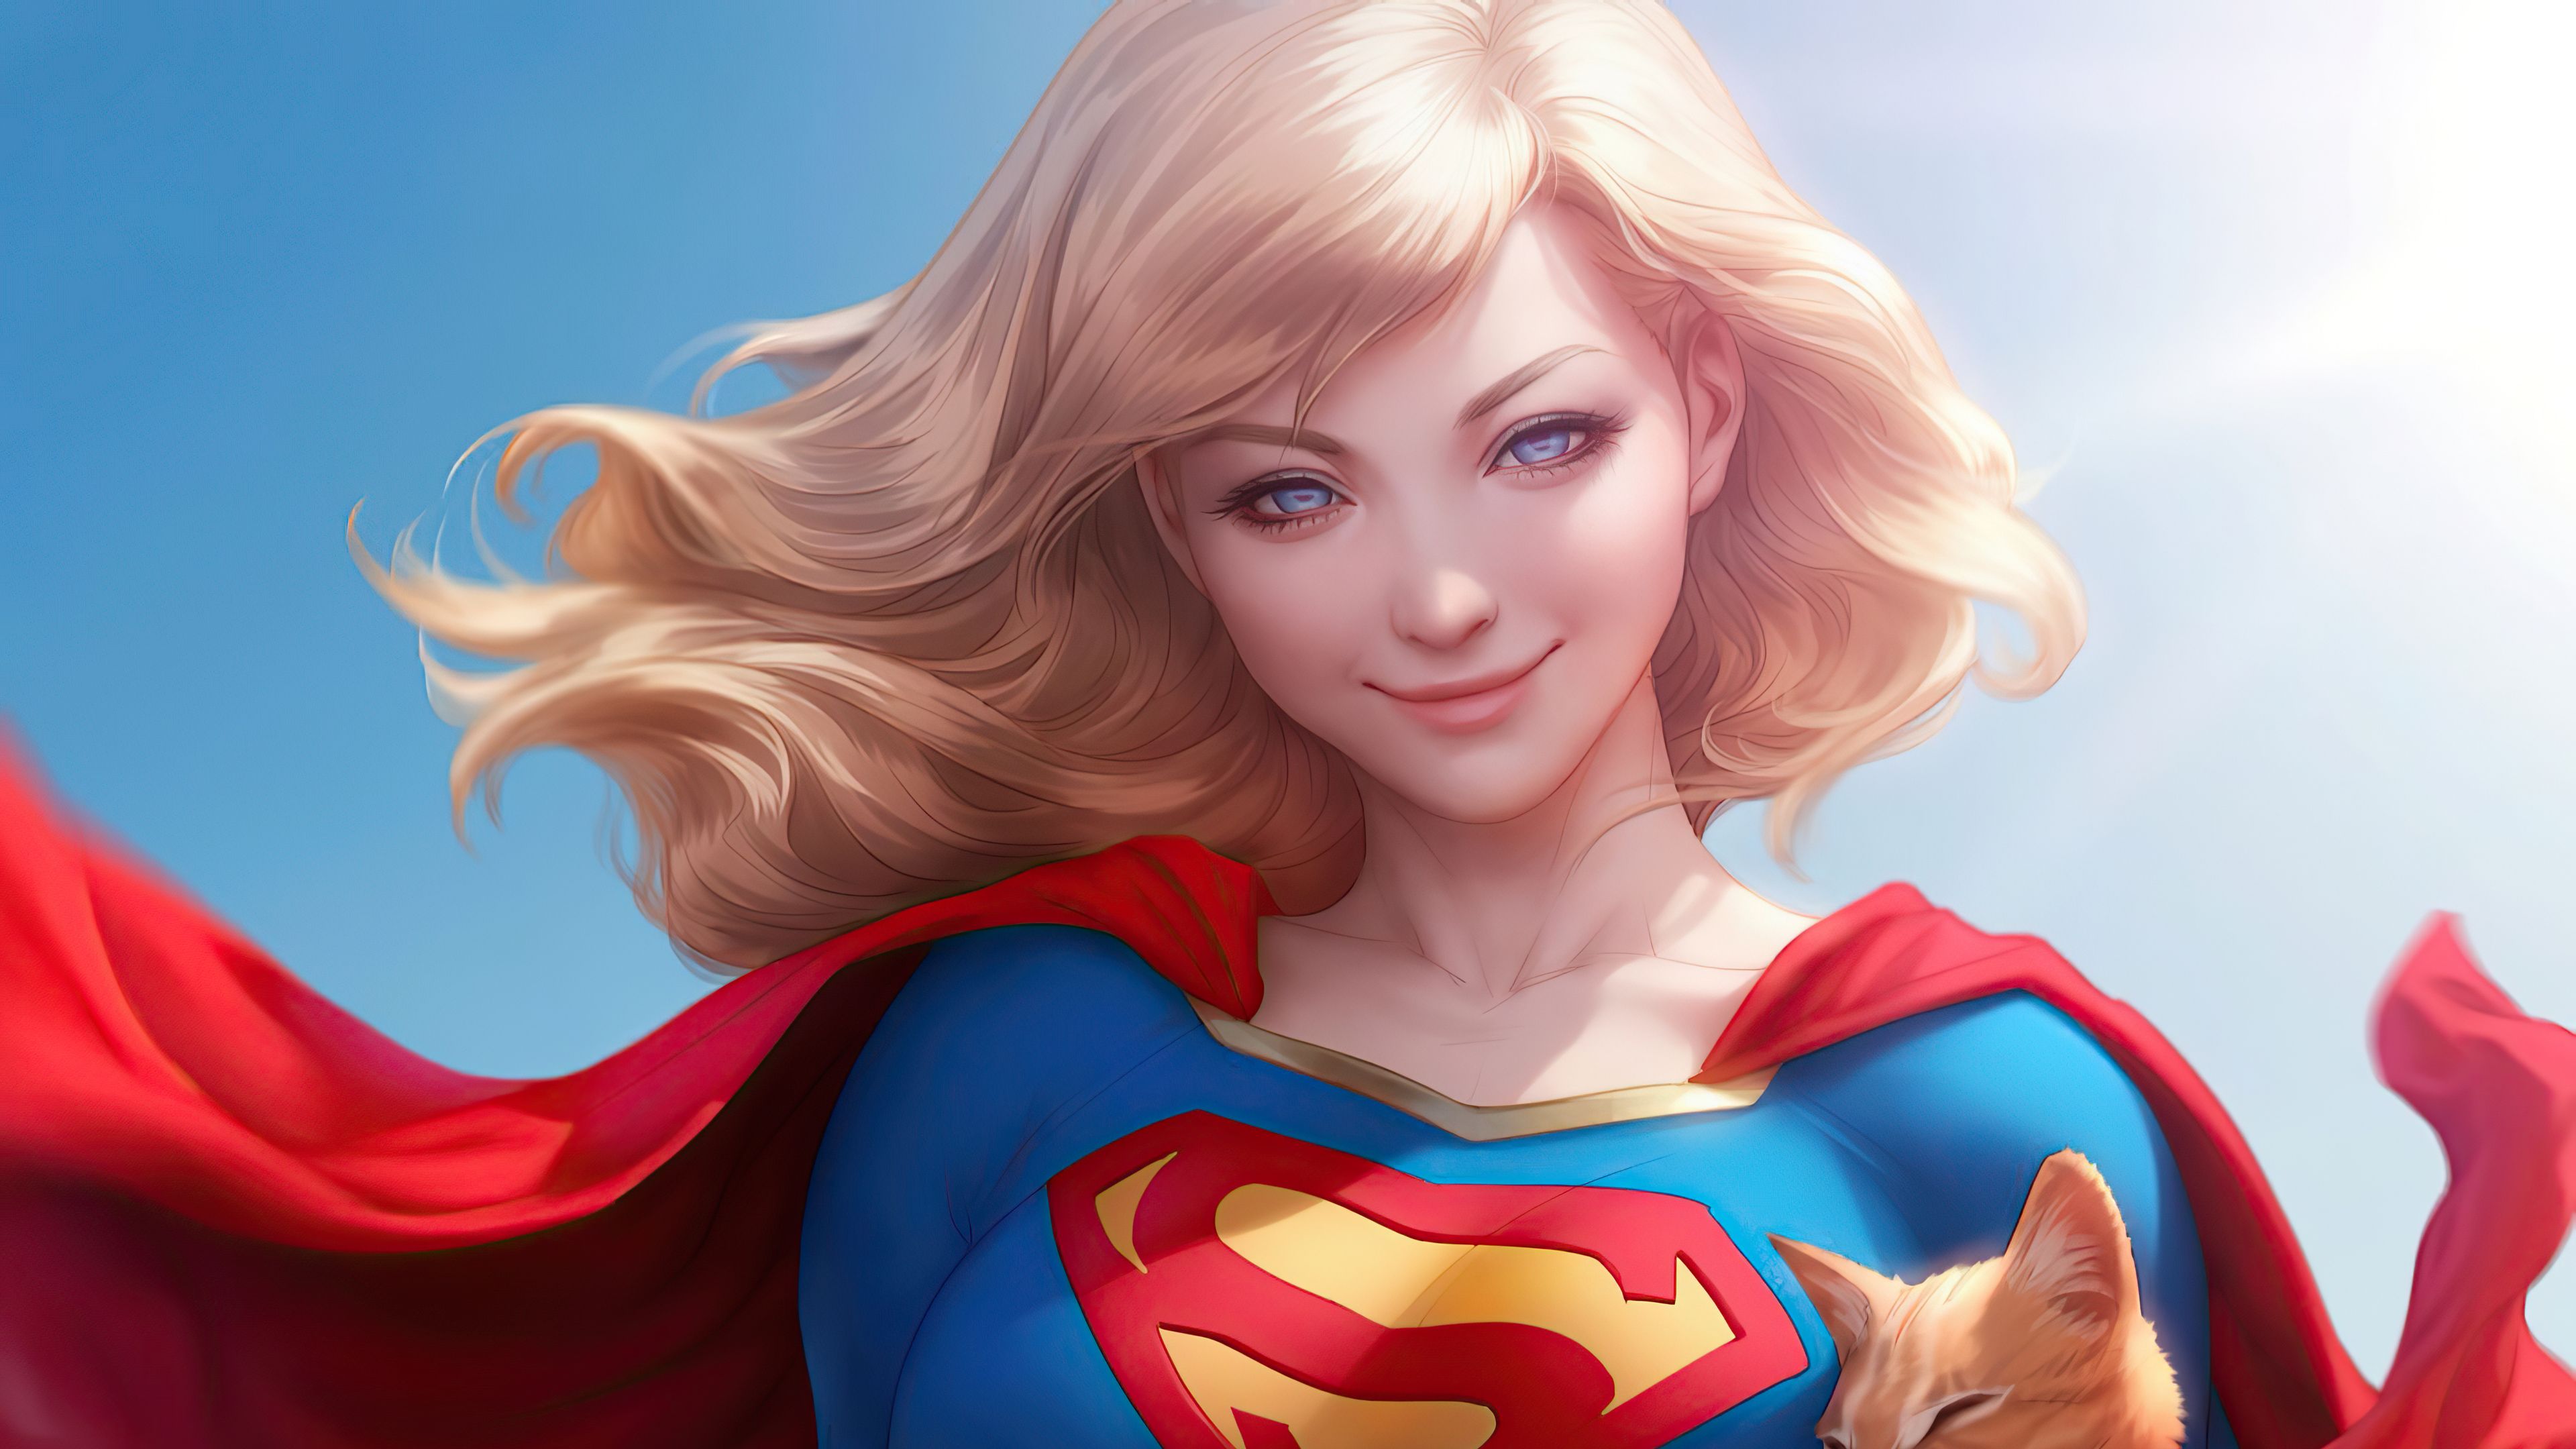 Supergirl With Cat, HD Superheroes, 4k Wallpapers, Image, Backgrounds, Phot...